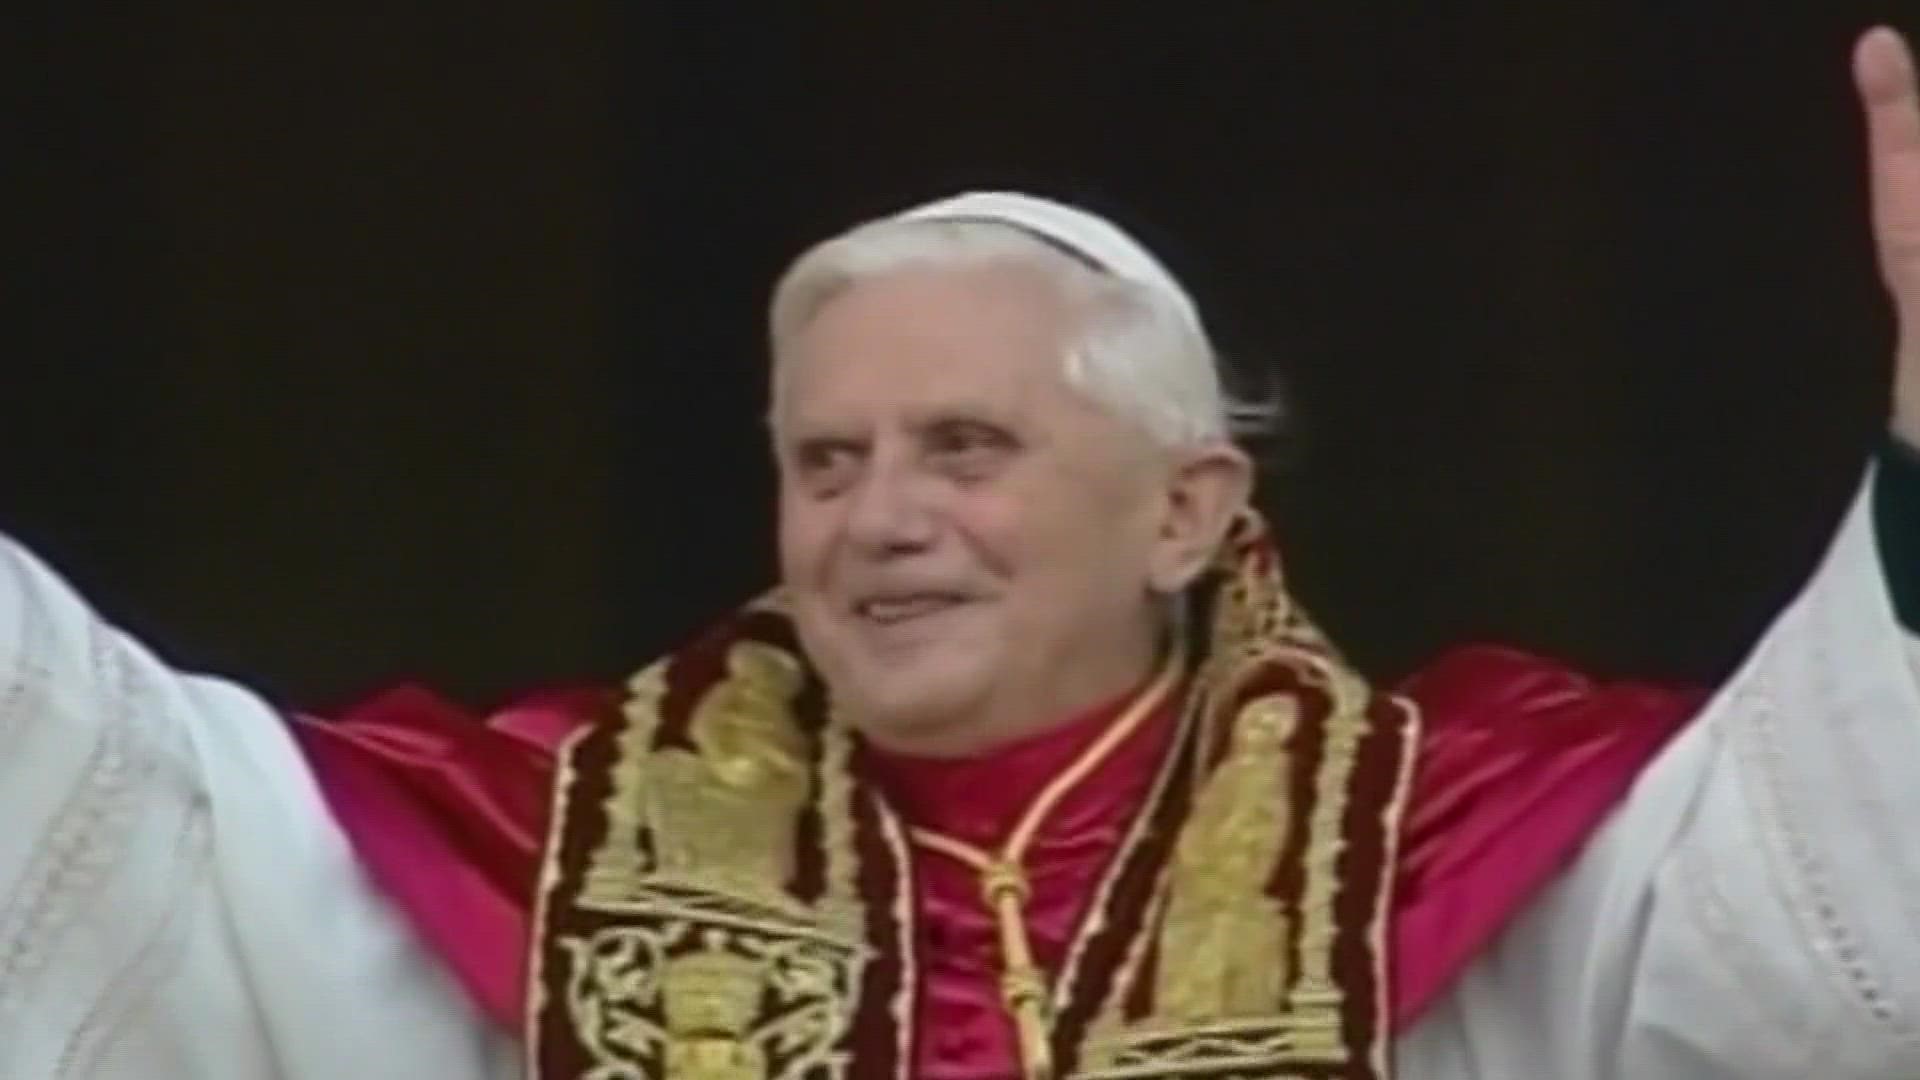 Pope Emeritus Benedict XVI, the first pontiff in 600 years to resign from the job, died Saturday. He was 95.